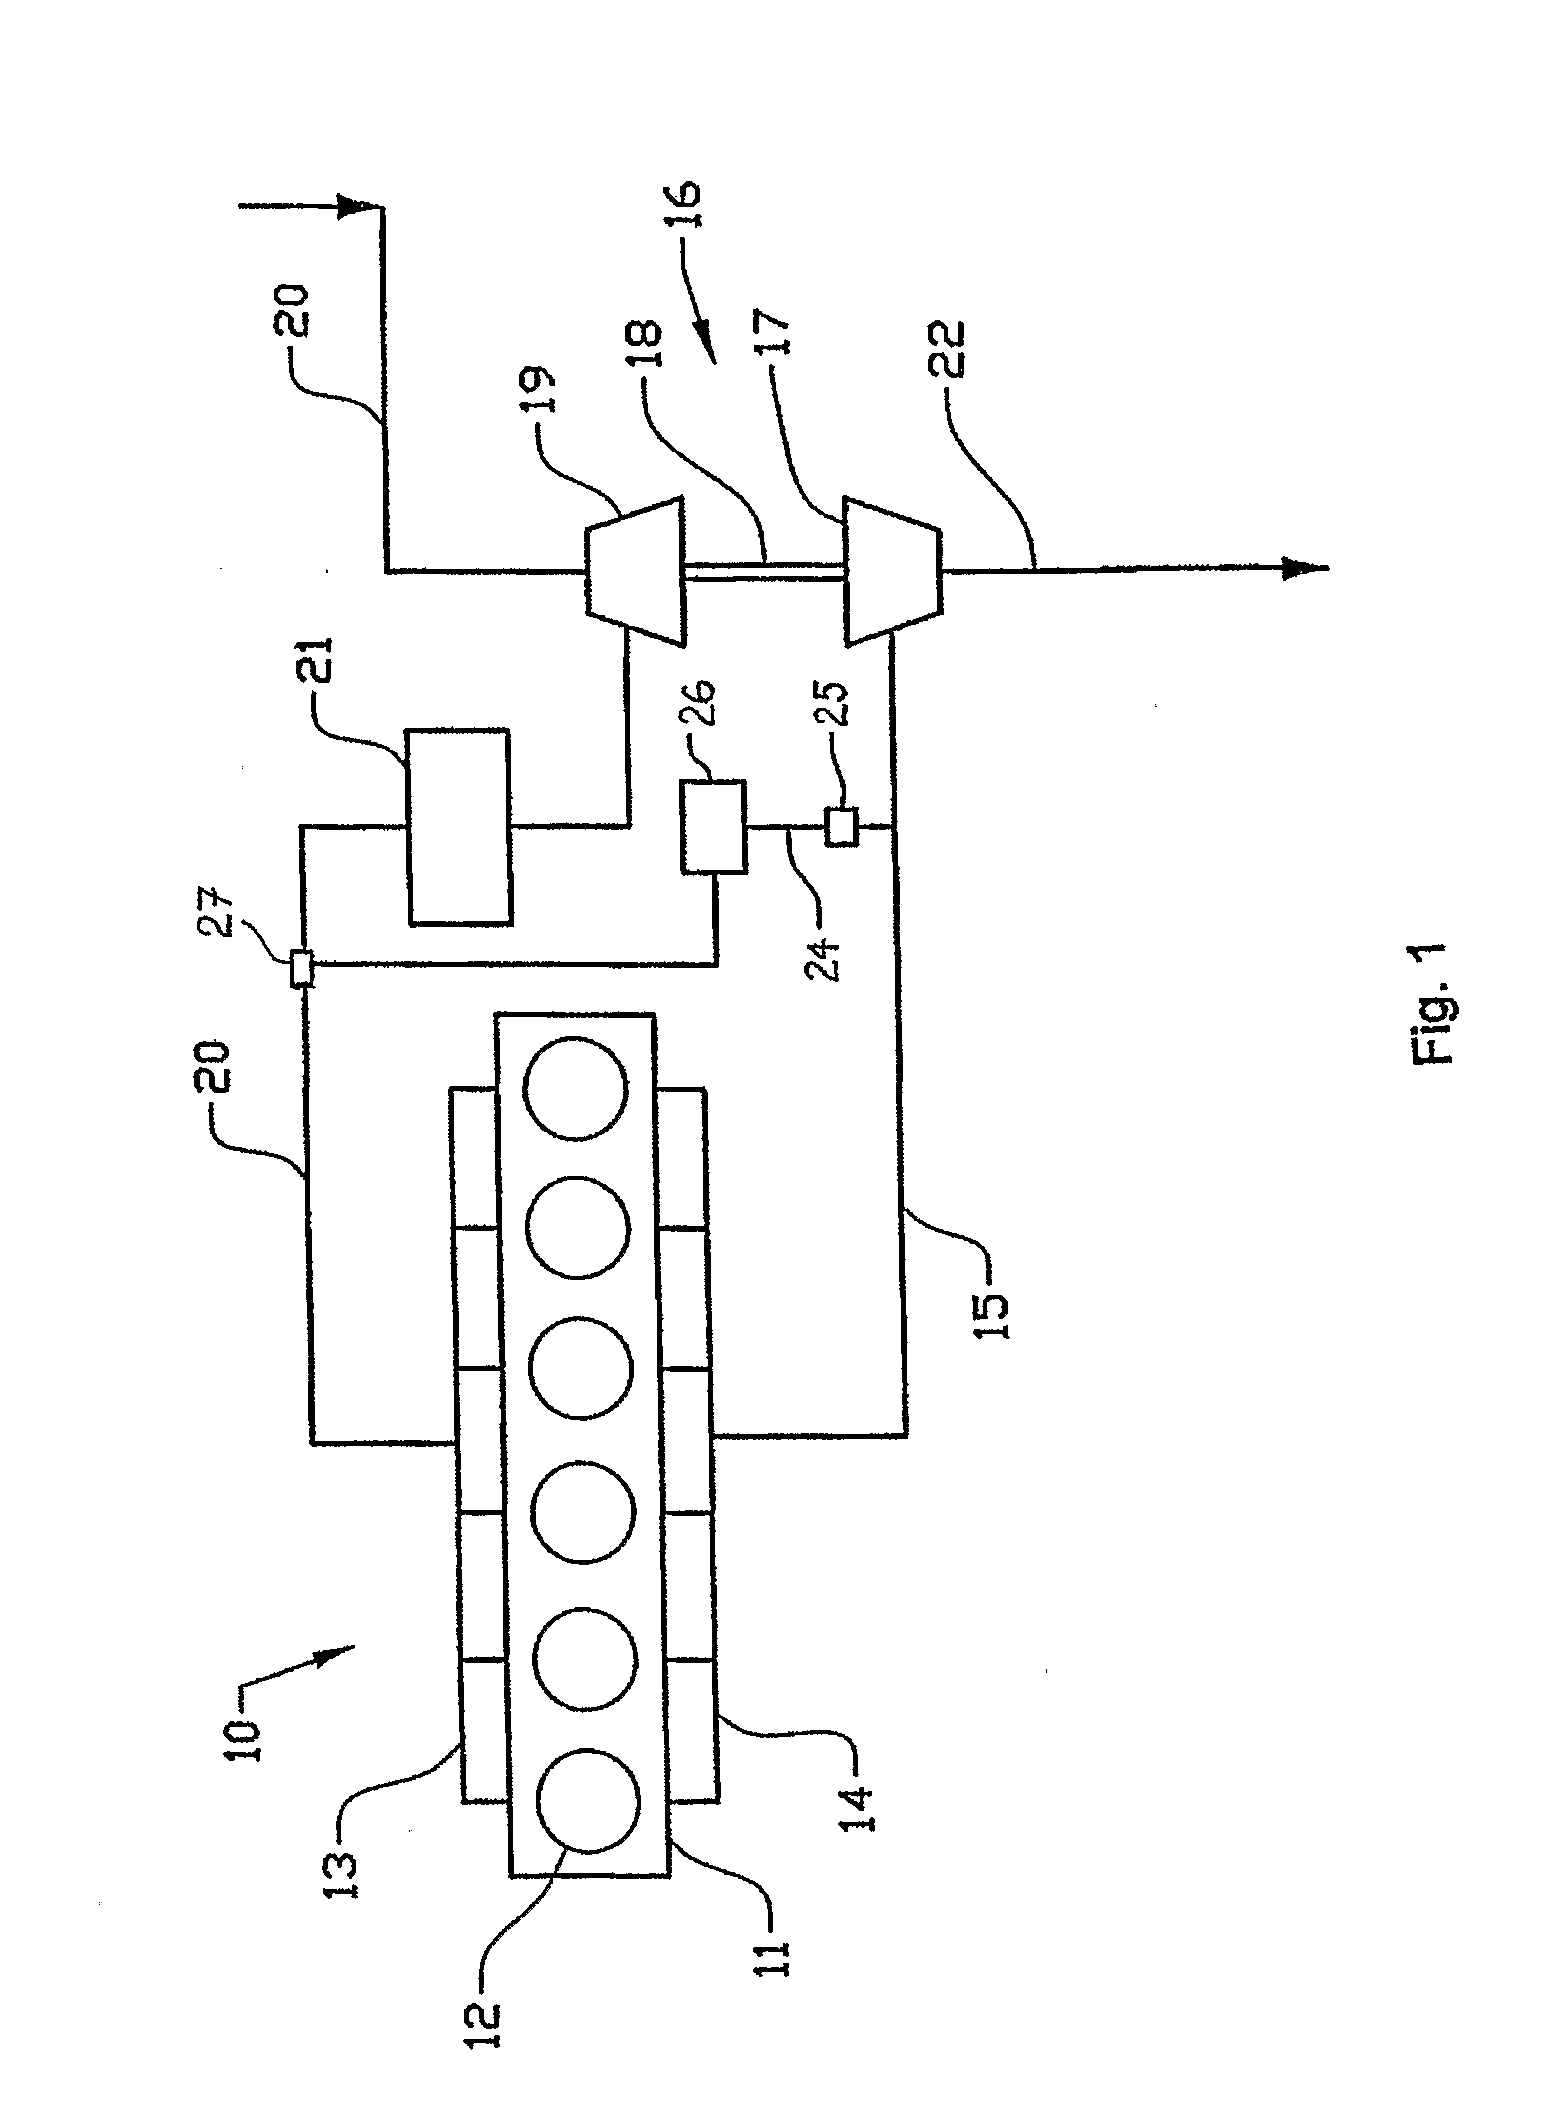 Exhaust Gas Recirculation Mixer for a Turbo-Charged Internal Combustion Engine